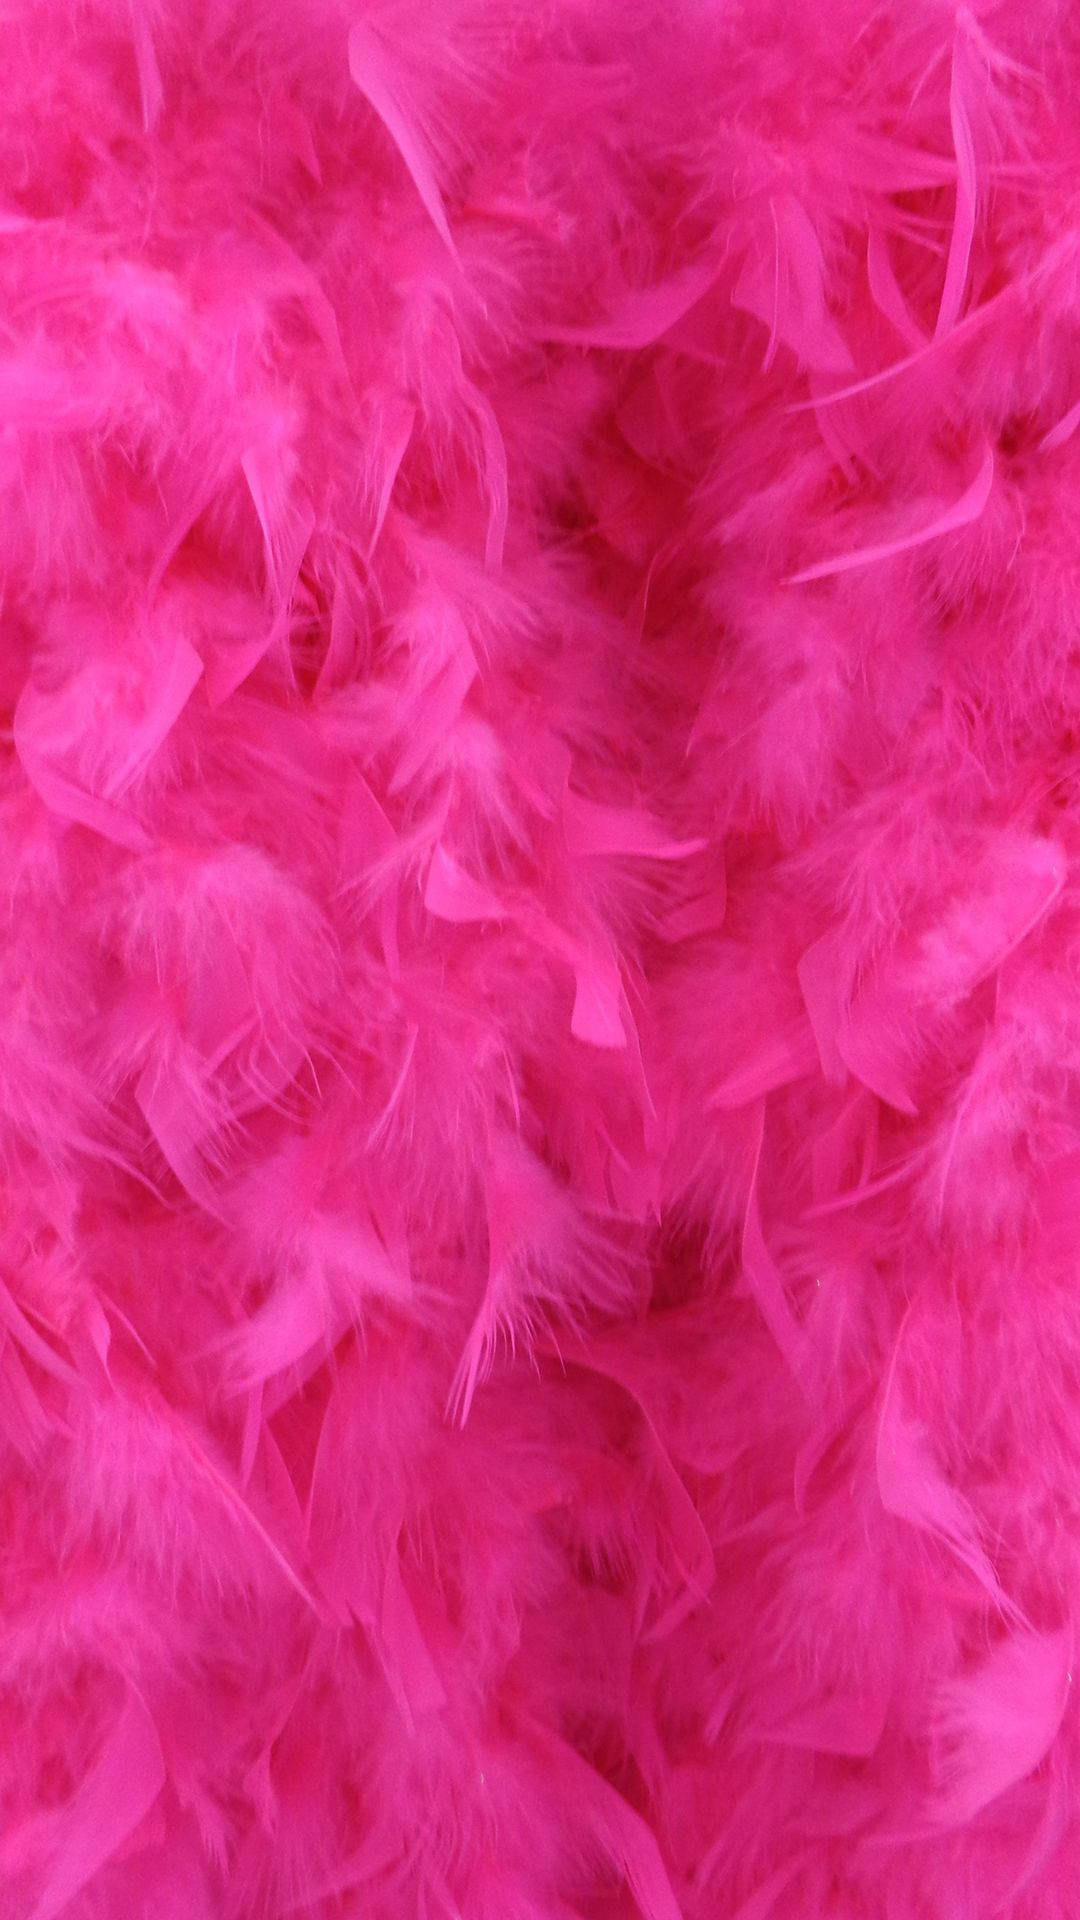 Lg Phone Bright Pink Feathers Background